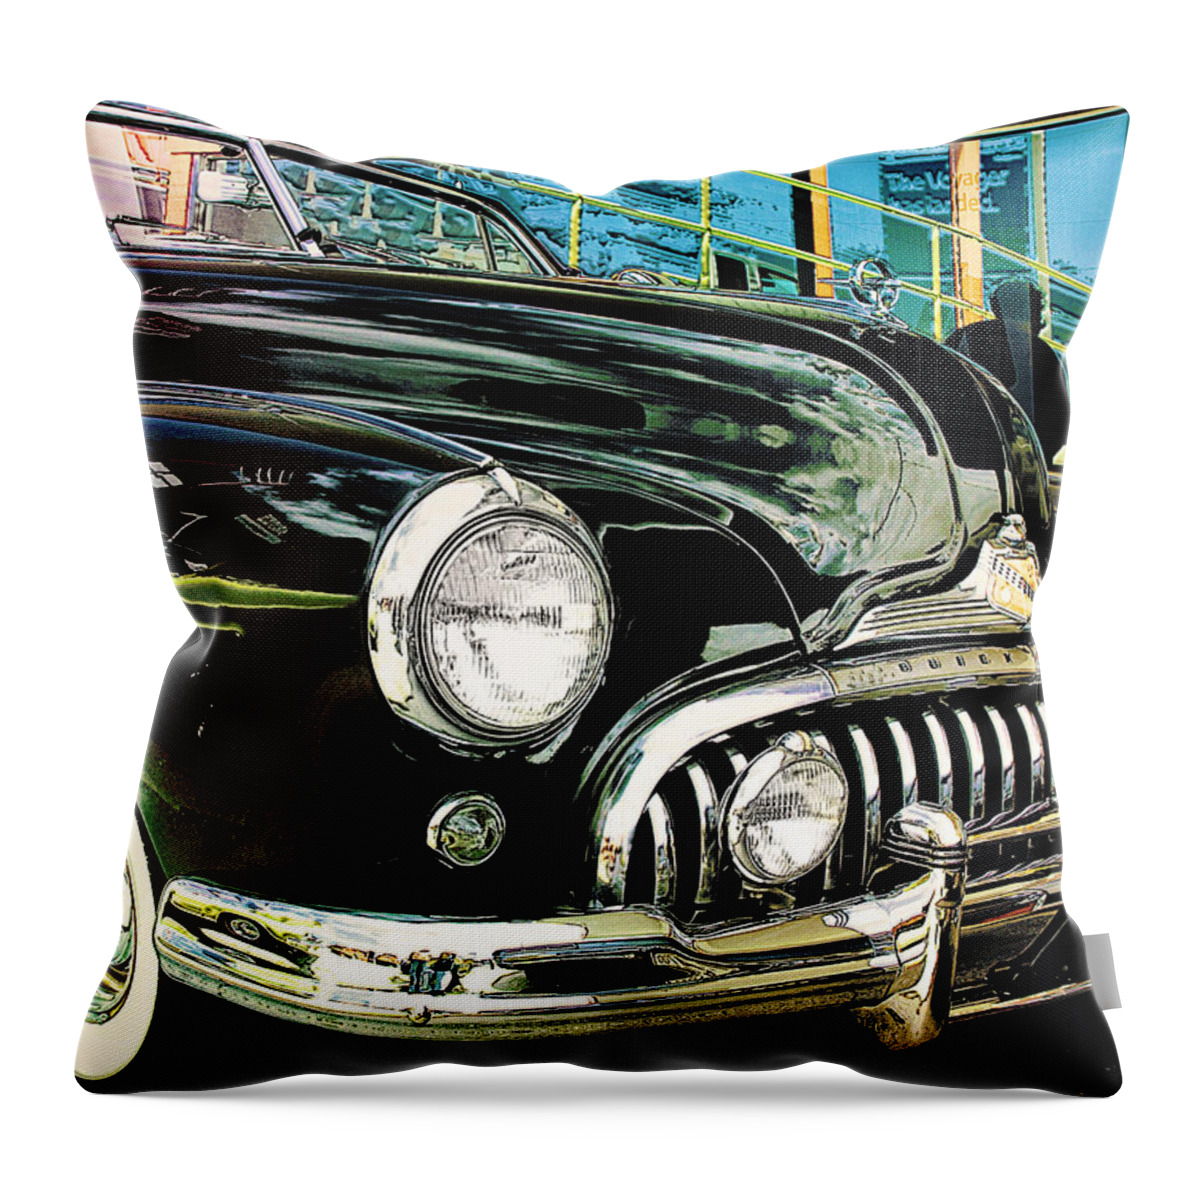 Buick Throw Pillow featuring the photograph Buick by John Anderson